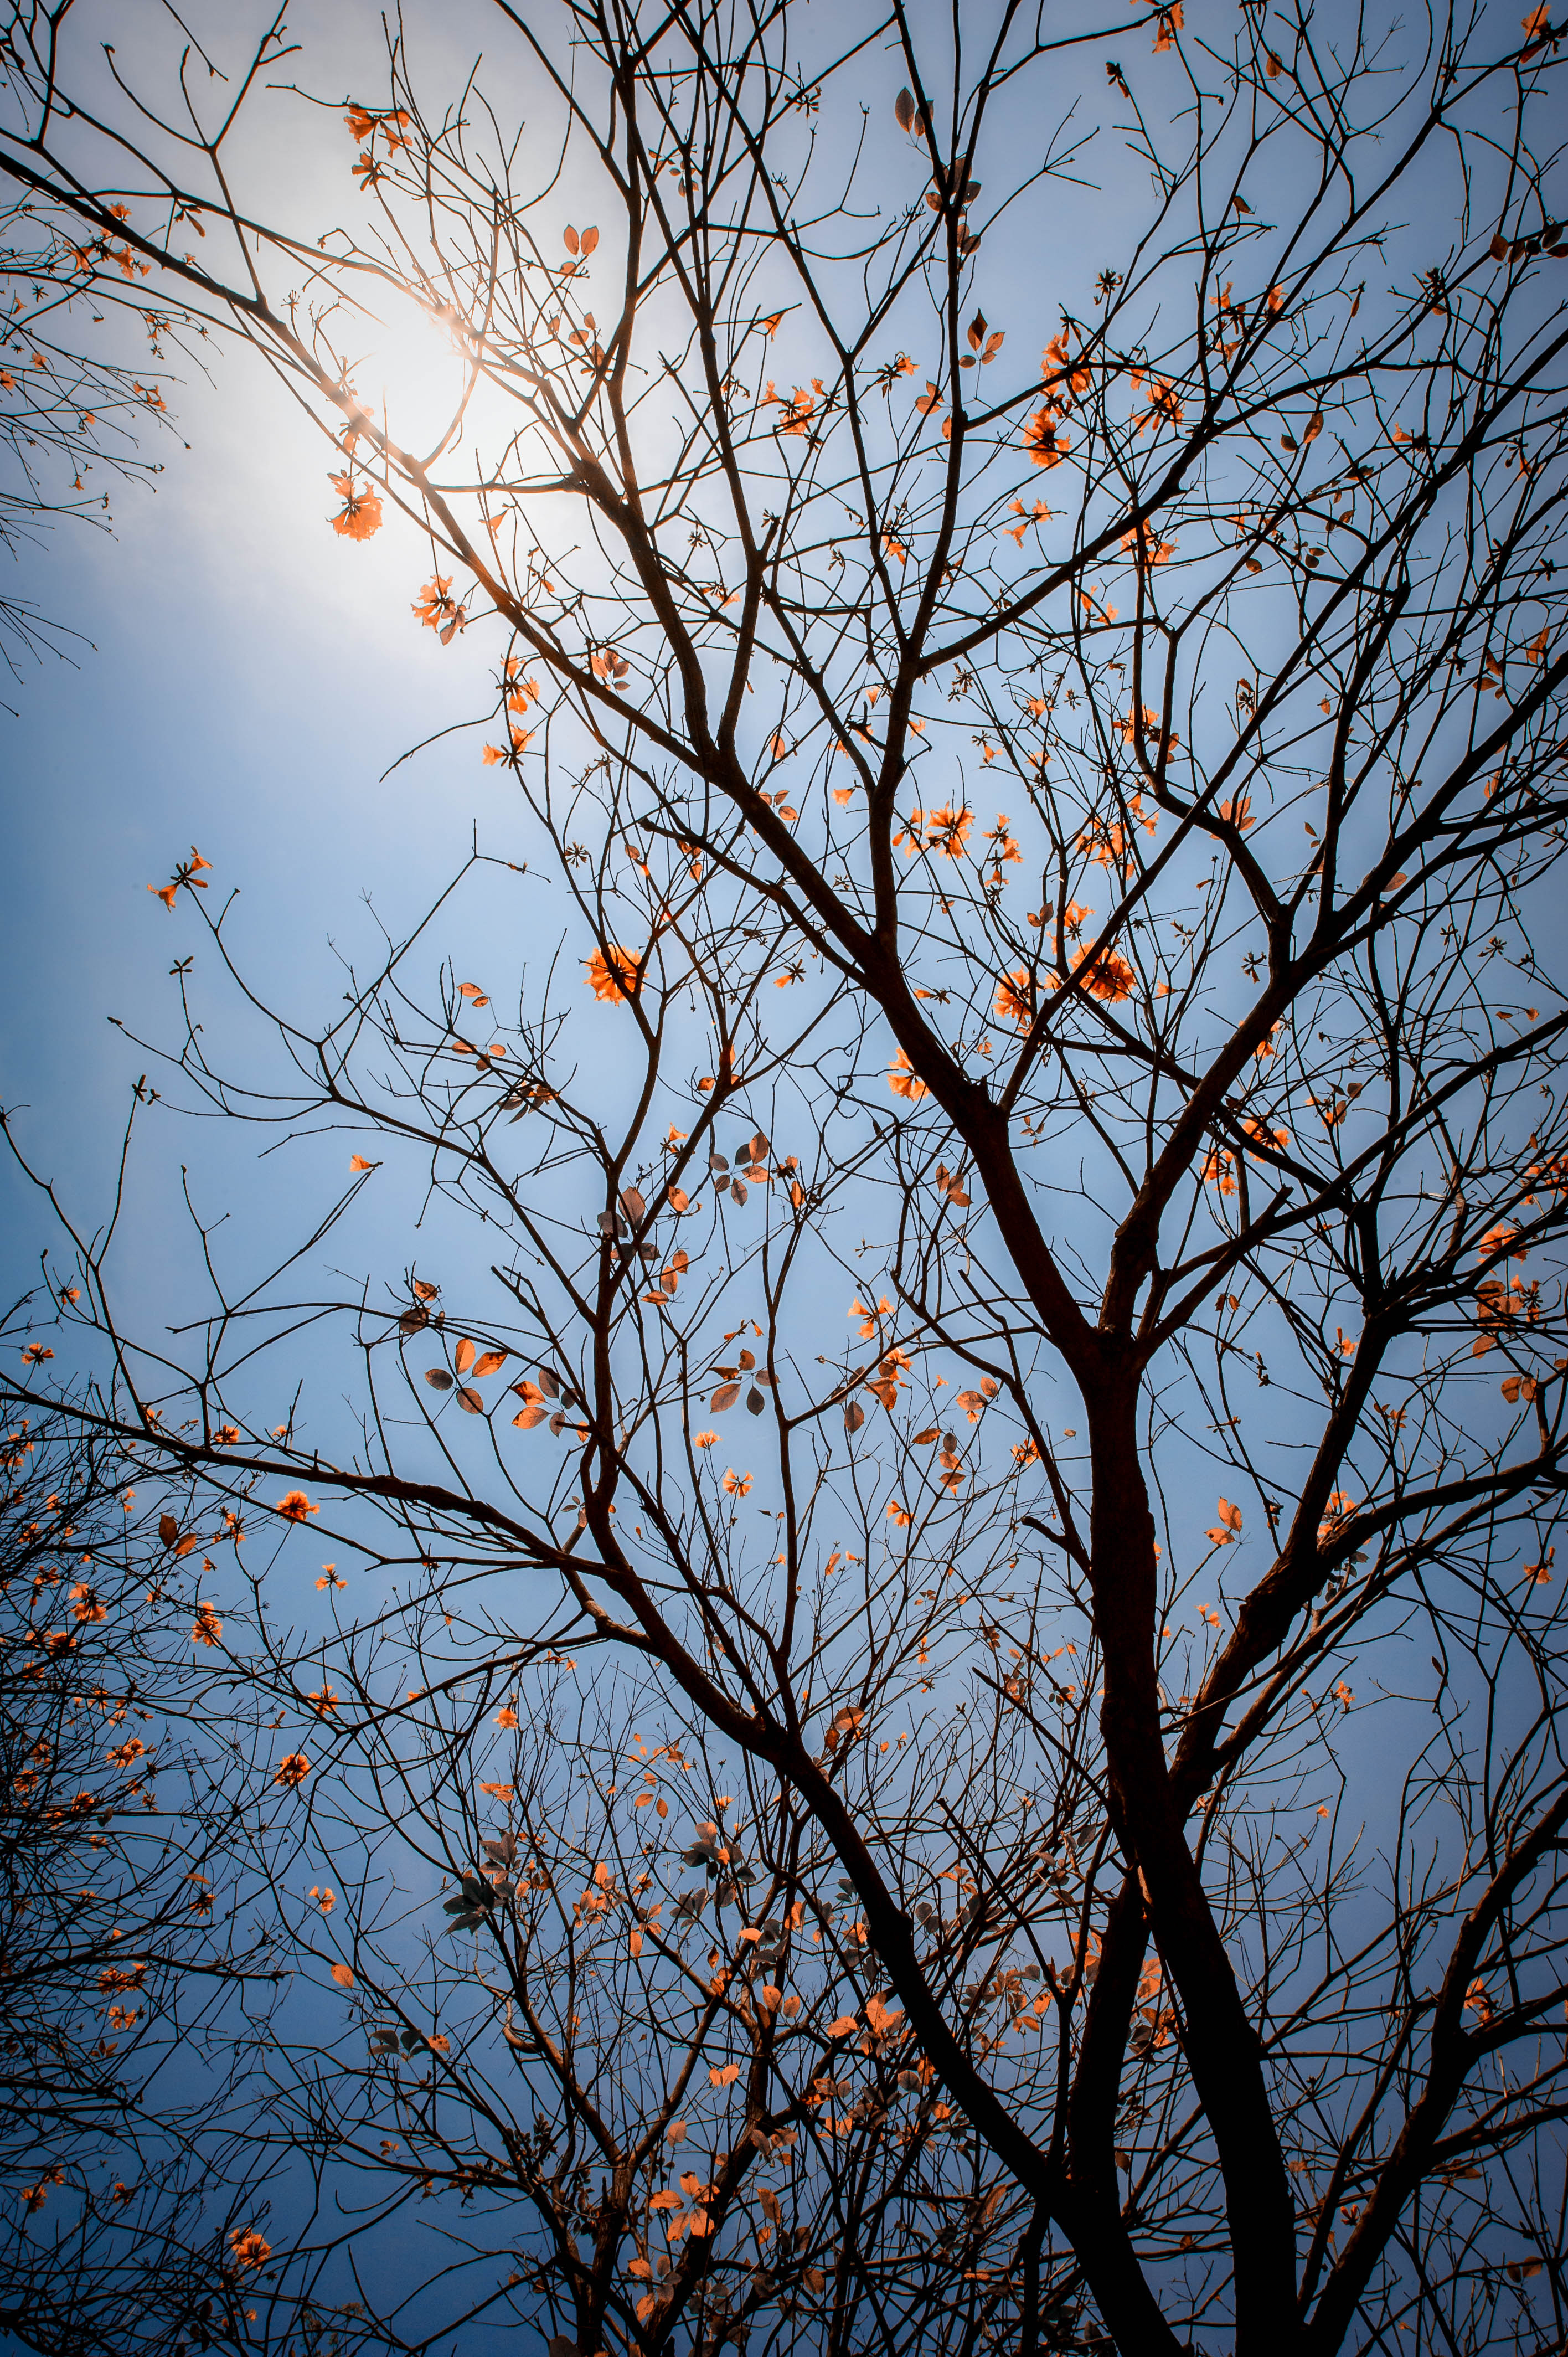 sky, wood, leaves, nature, flowers, tree, branches Full HD